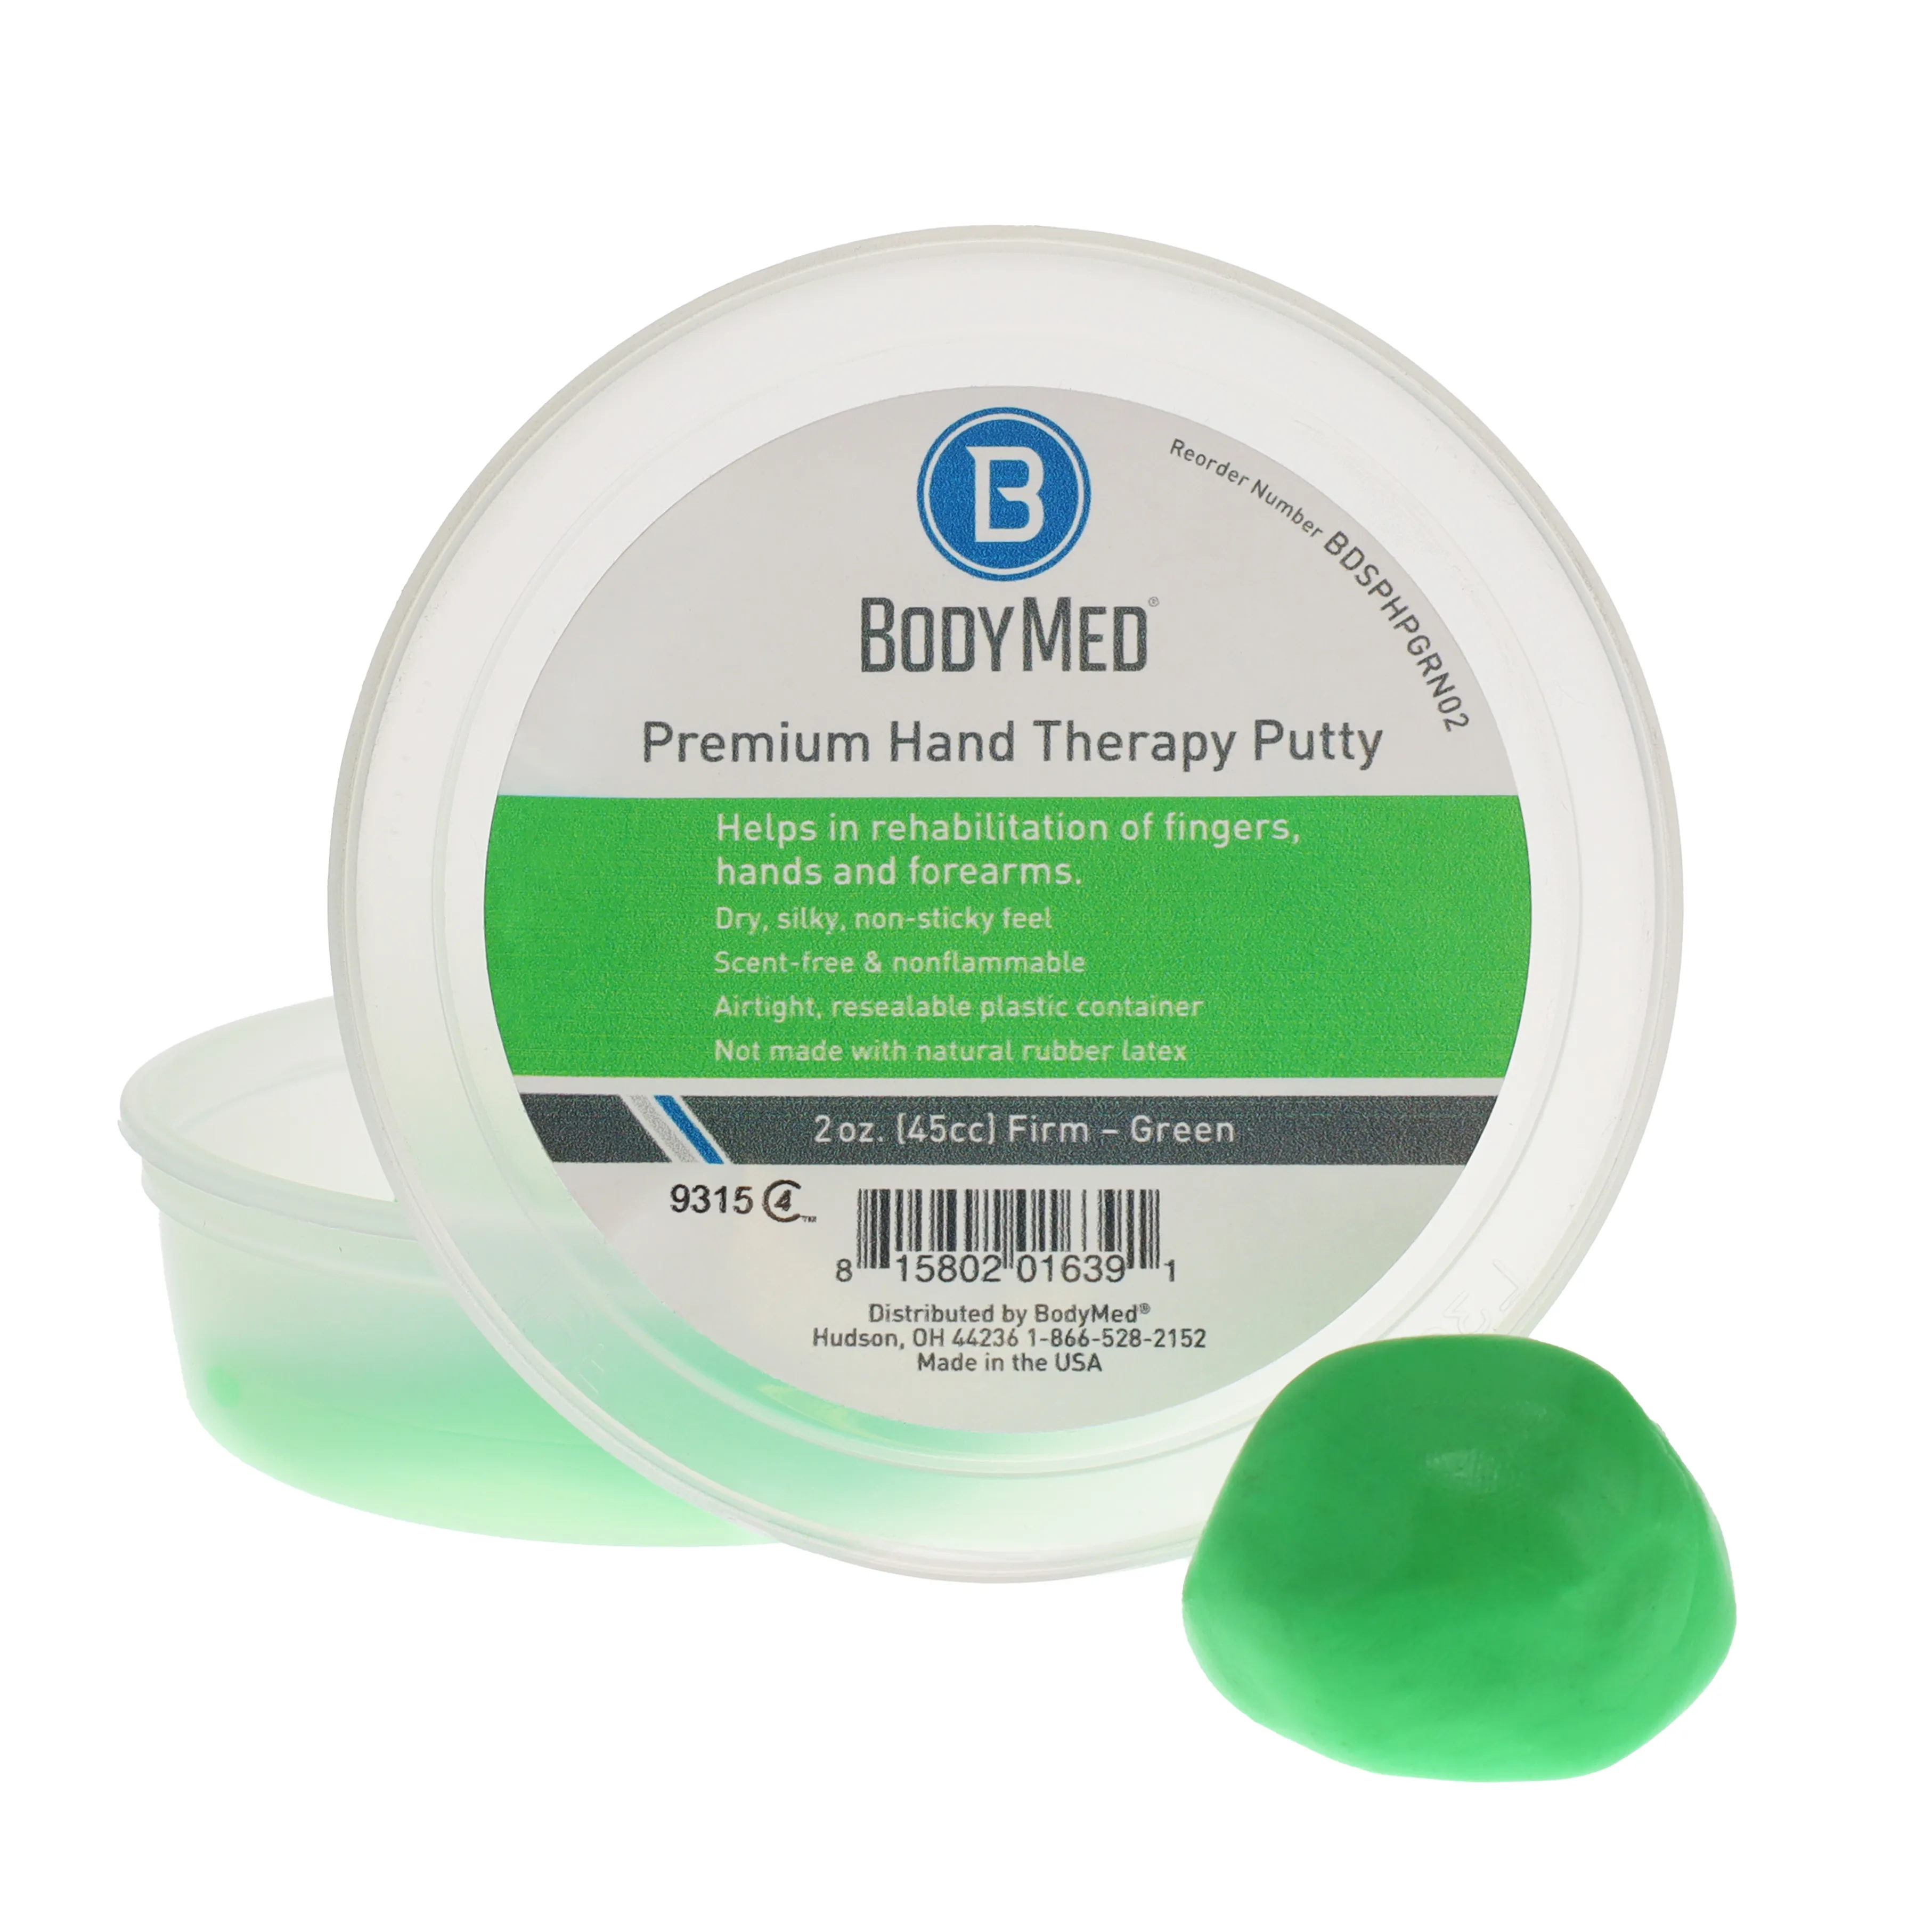 Bodymed - BDSPHPGRN02 - Premium Hand Therapy Putty - Firm